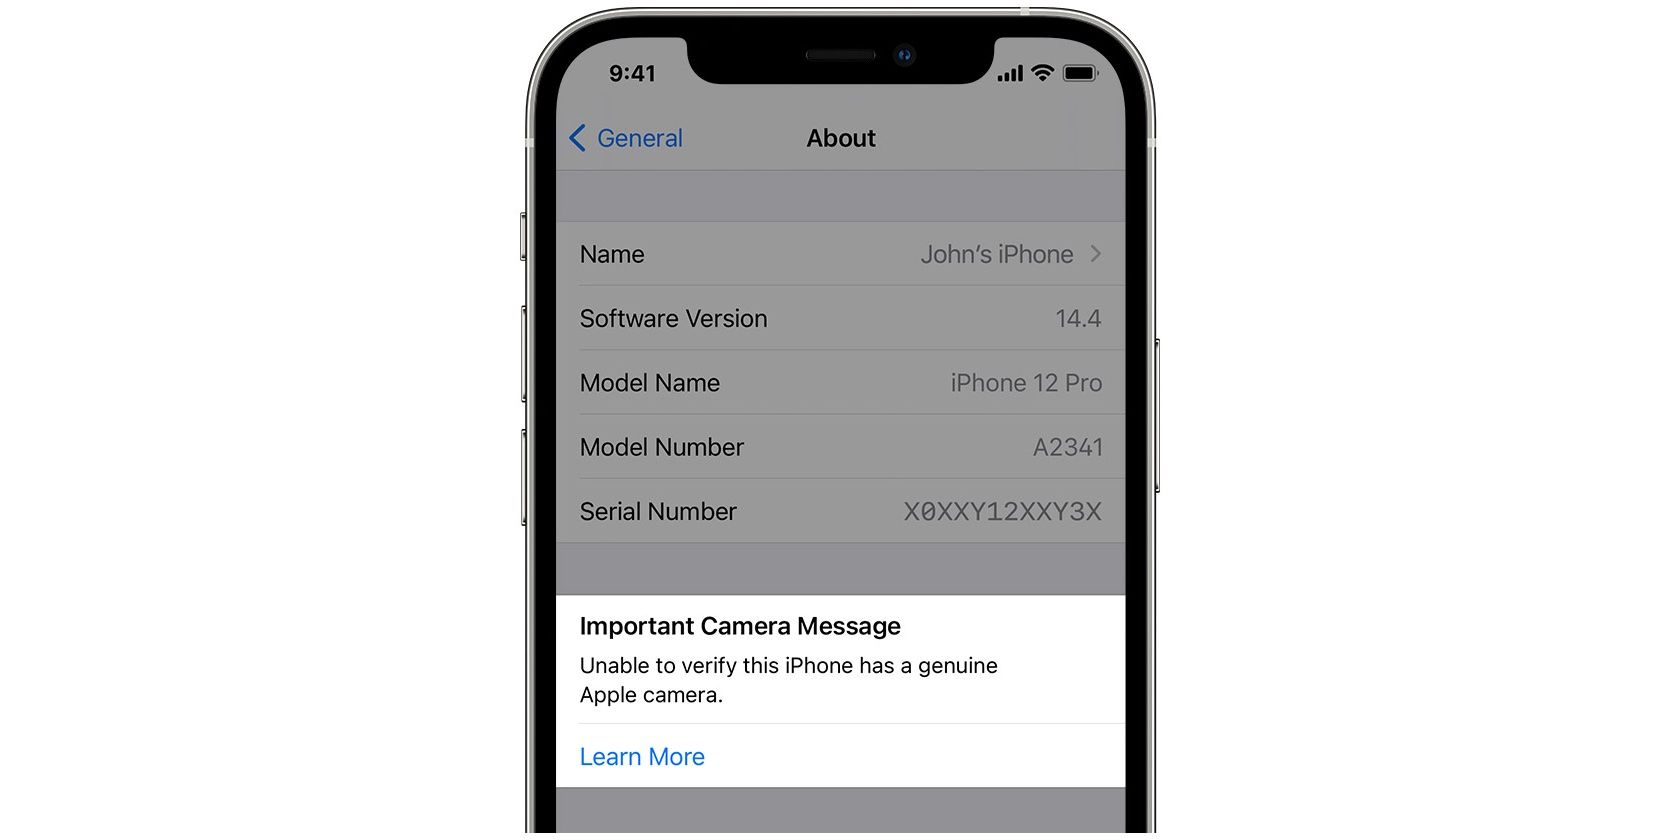 A screenshot showing a warning in the Settings app on iOS 14 about a non-Apple camera detected in the iPhone